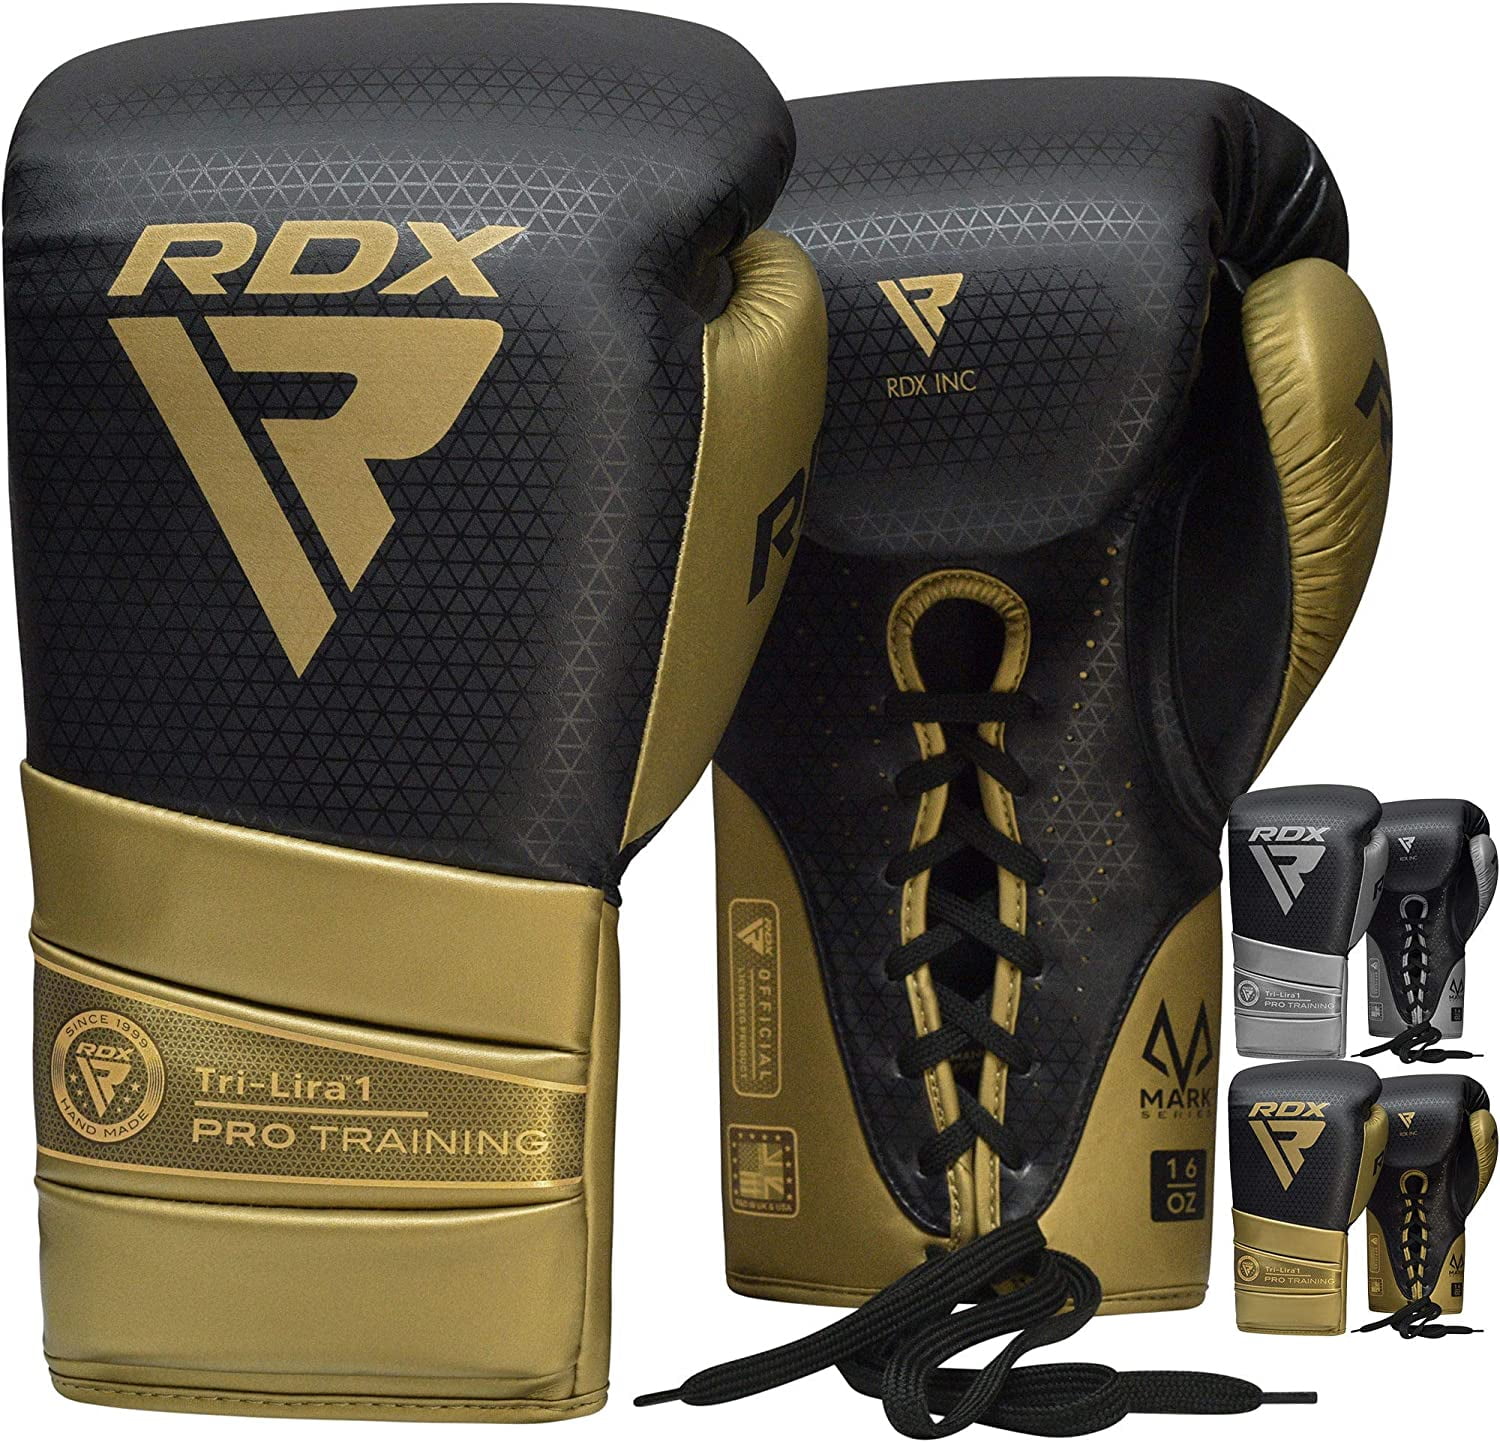 MADX Boxing Gloves and Focus Pads Set Hook & Jabs Mitts Punch Gym Training MMA